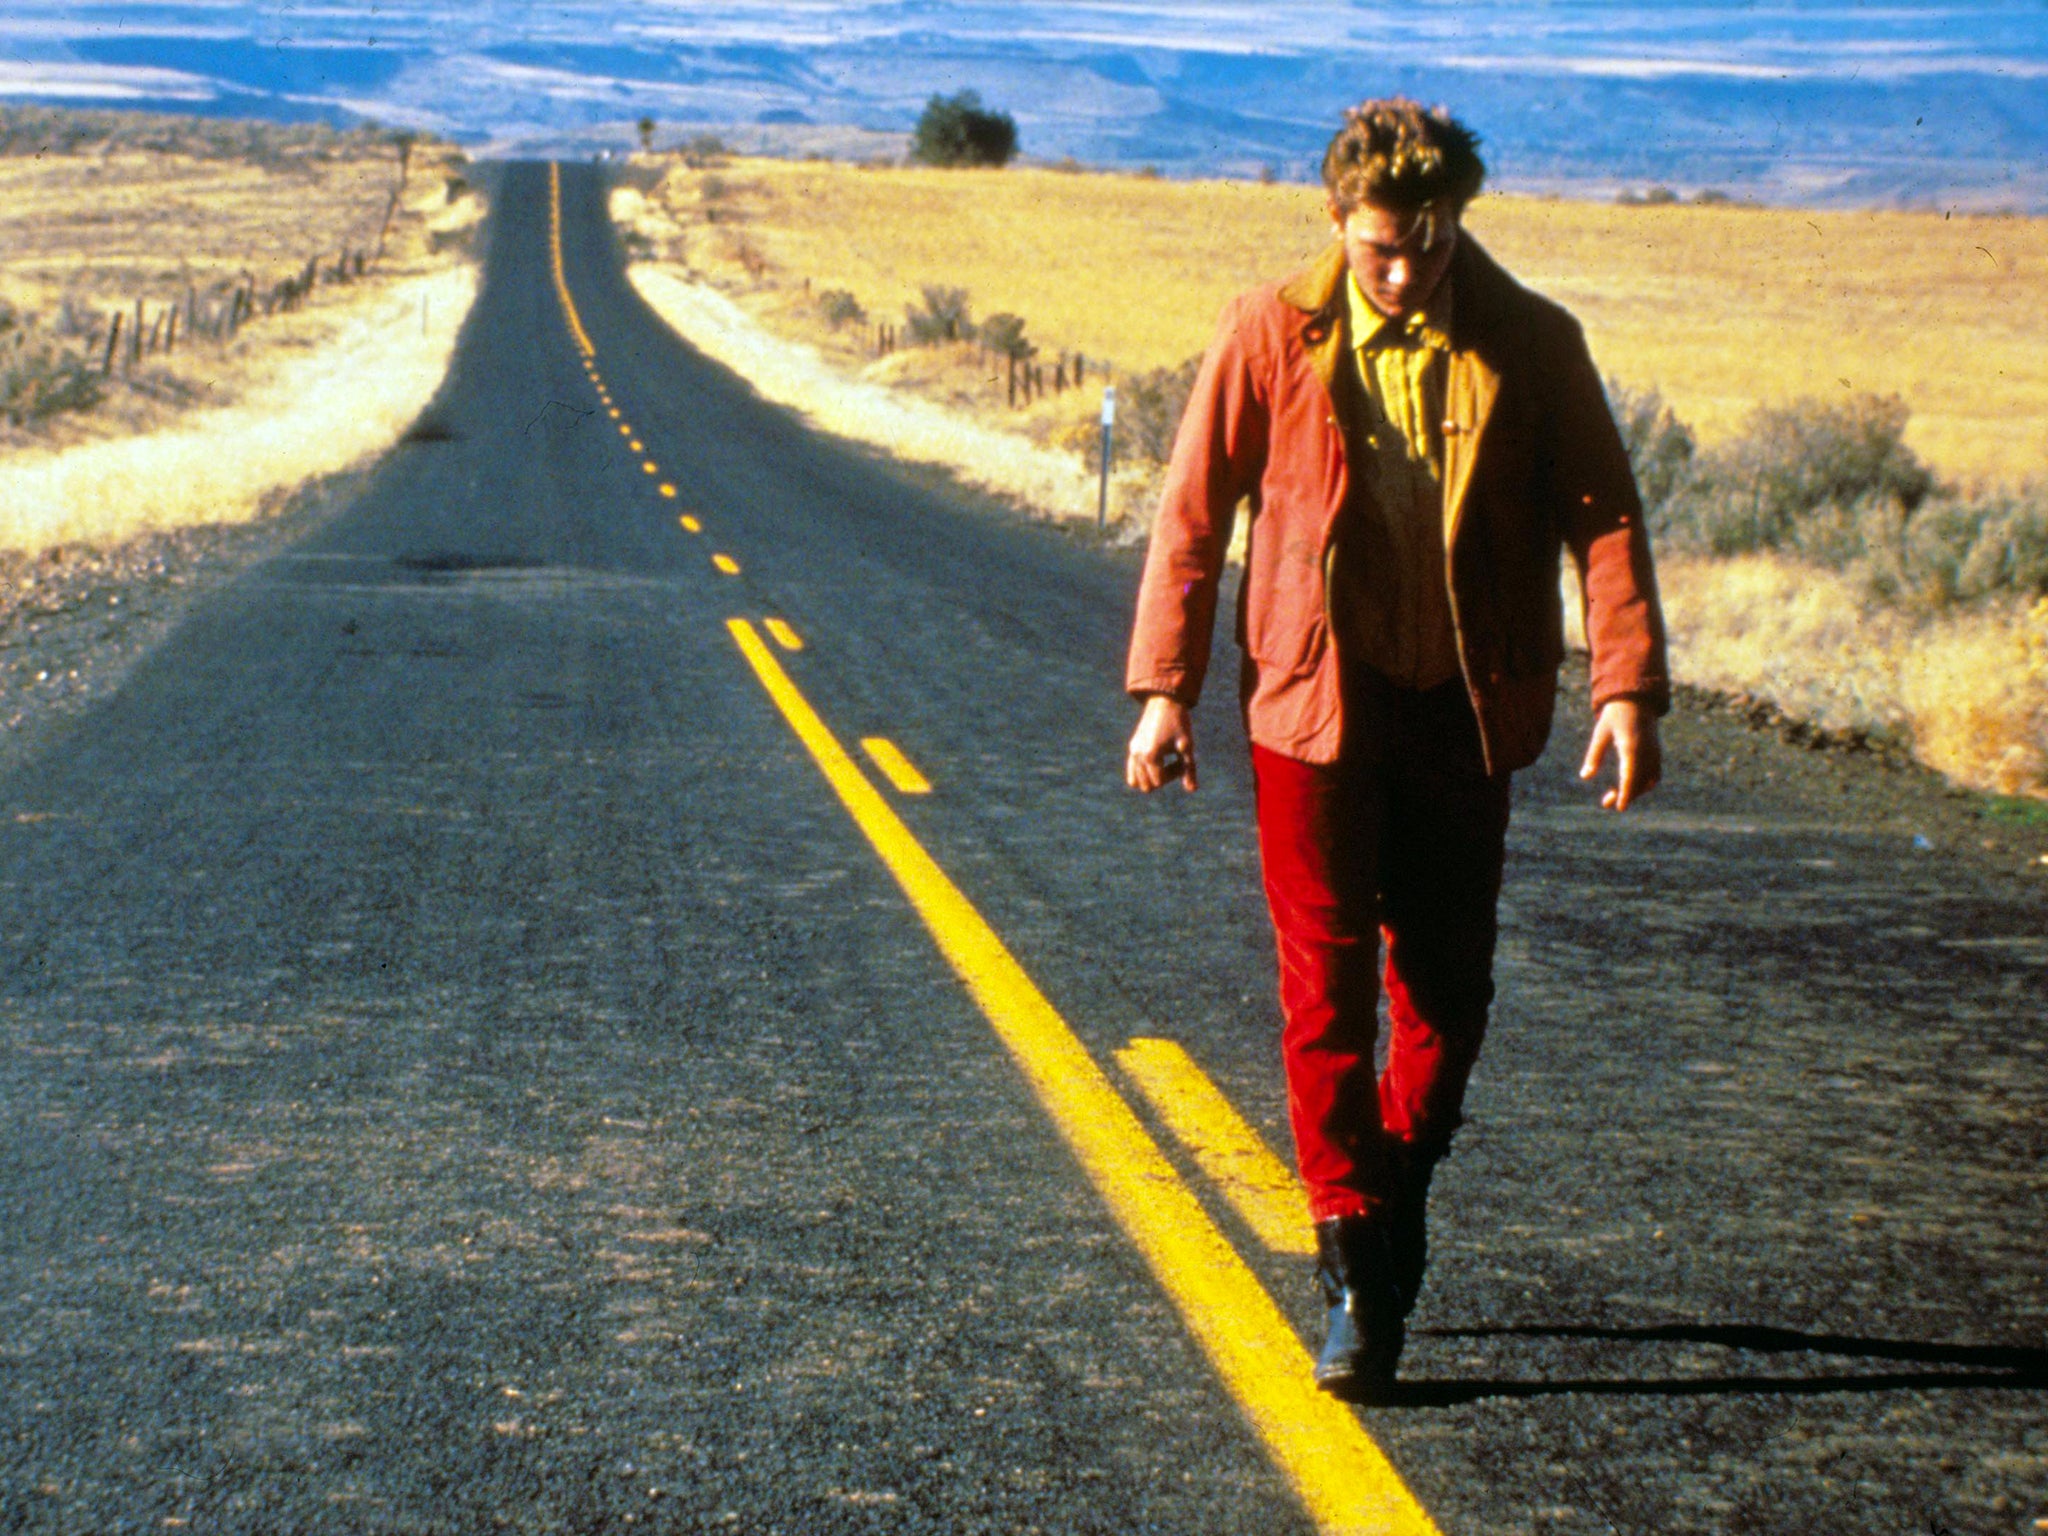 River Phoenix in ‘My Own Private Idaho'